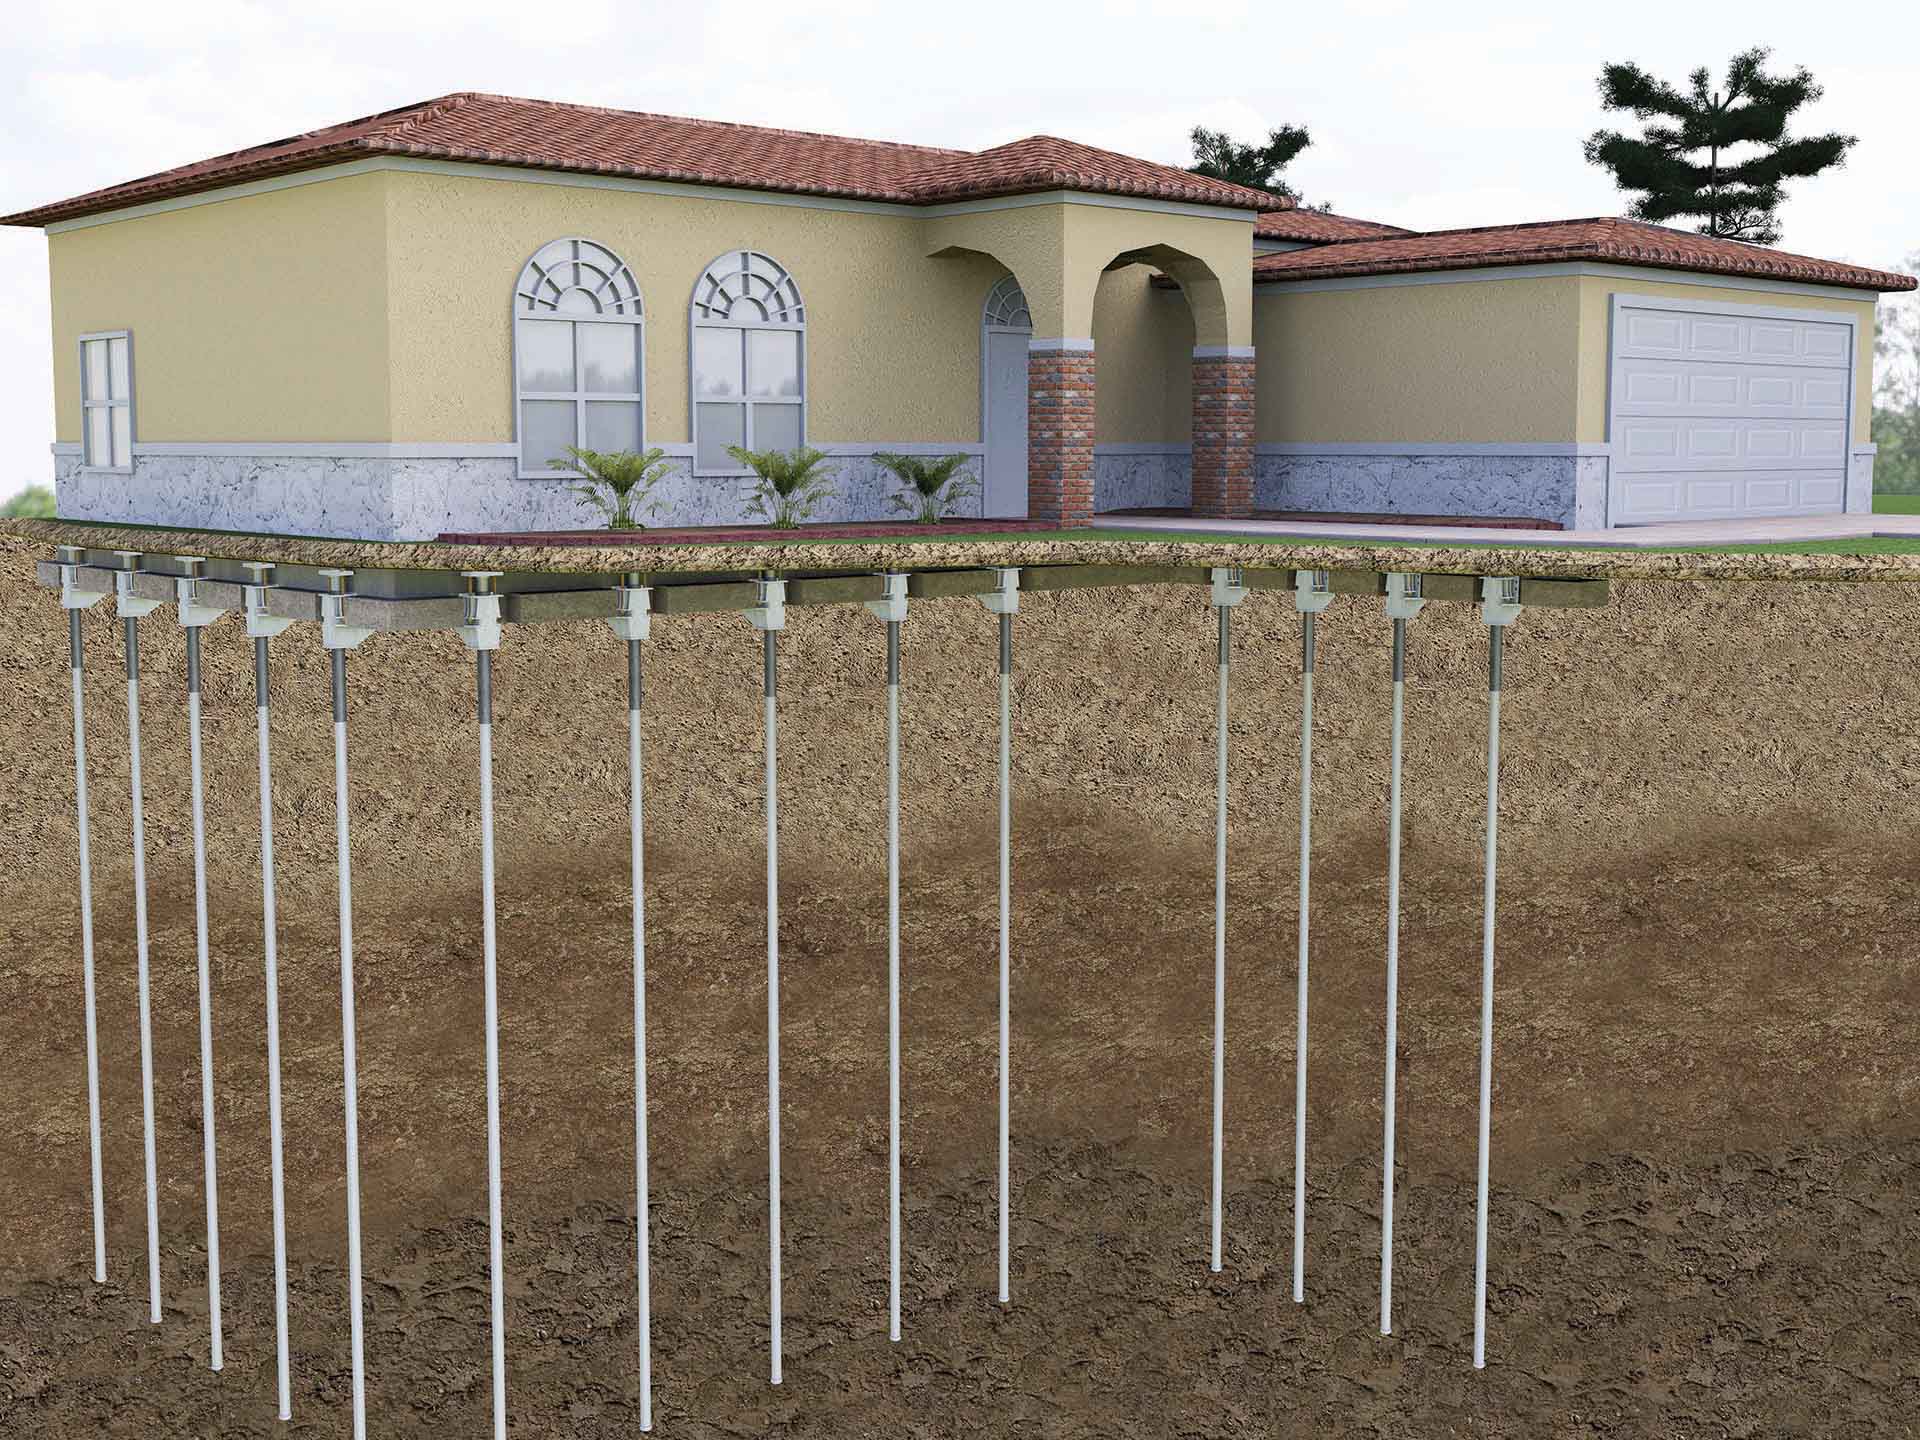 push pier system under stucco house cross section